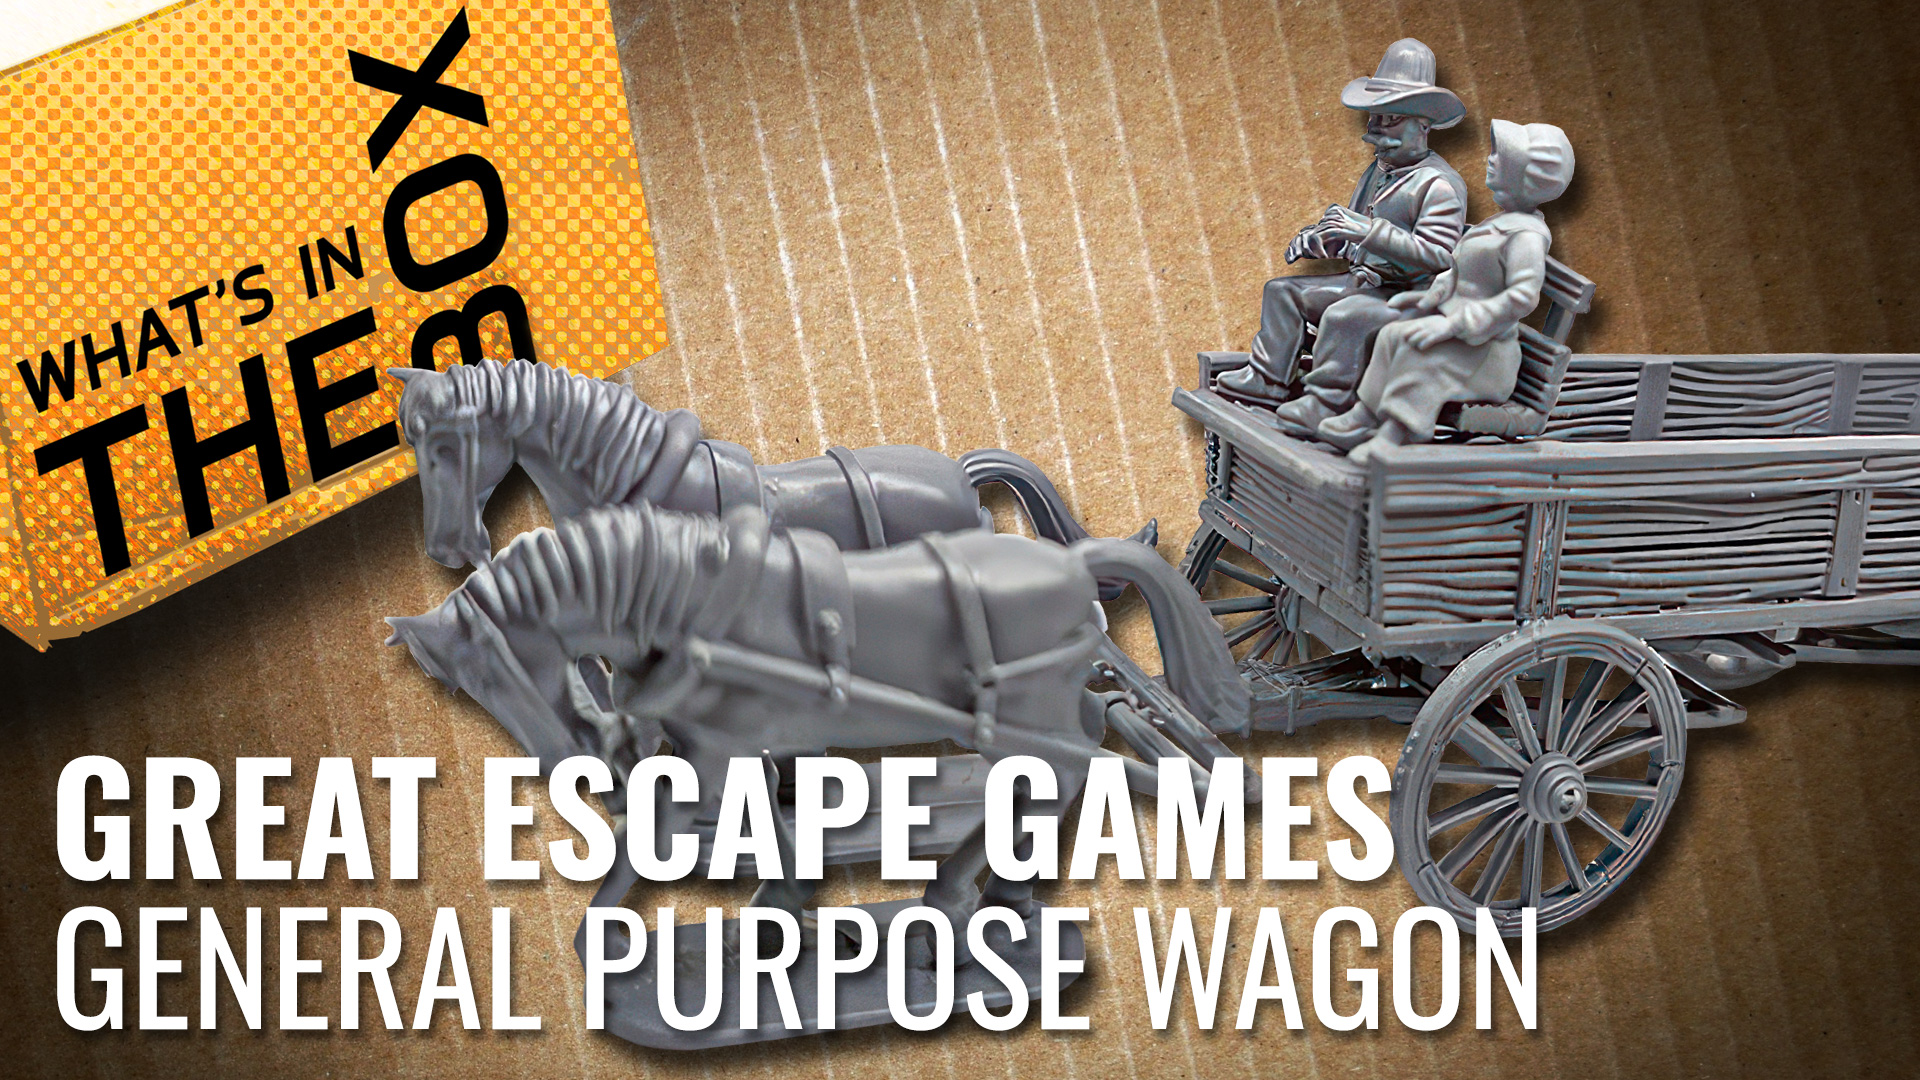 Unboxing-Great-Escape-Games_-Wagon-coverimage